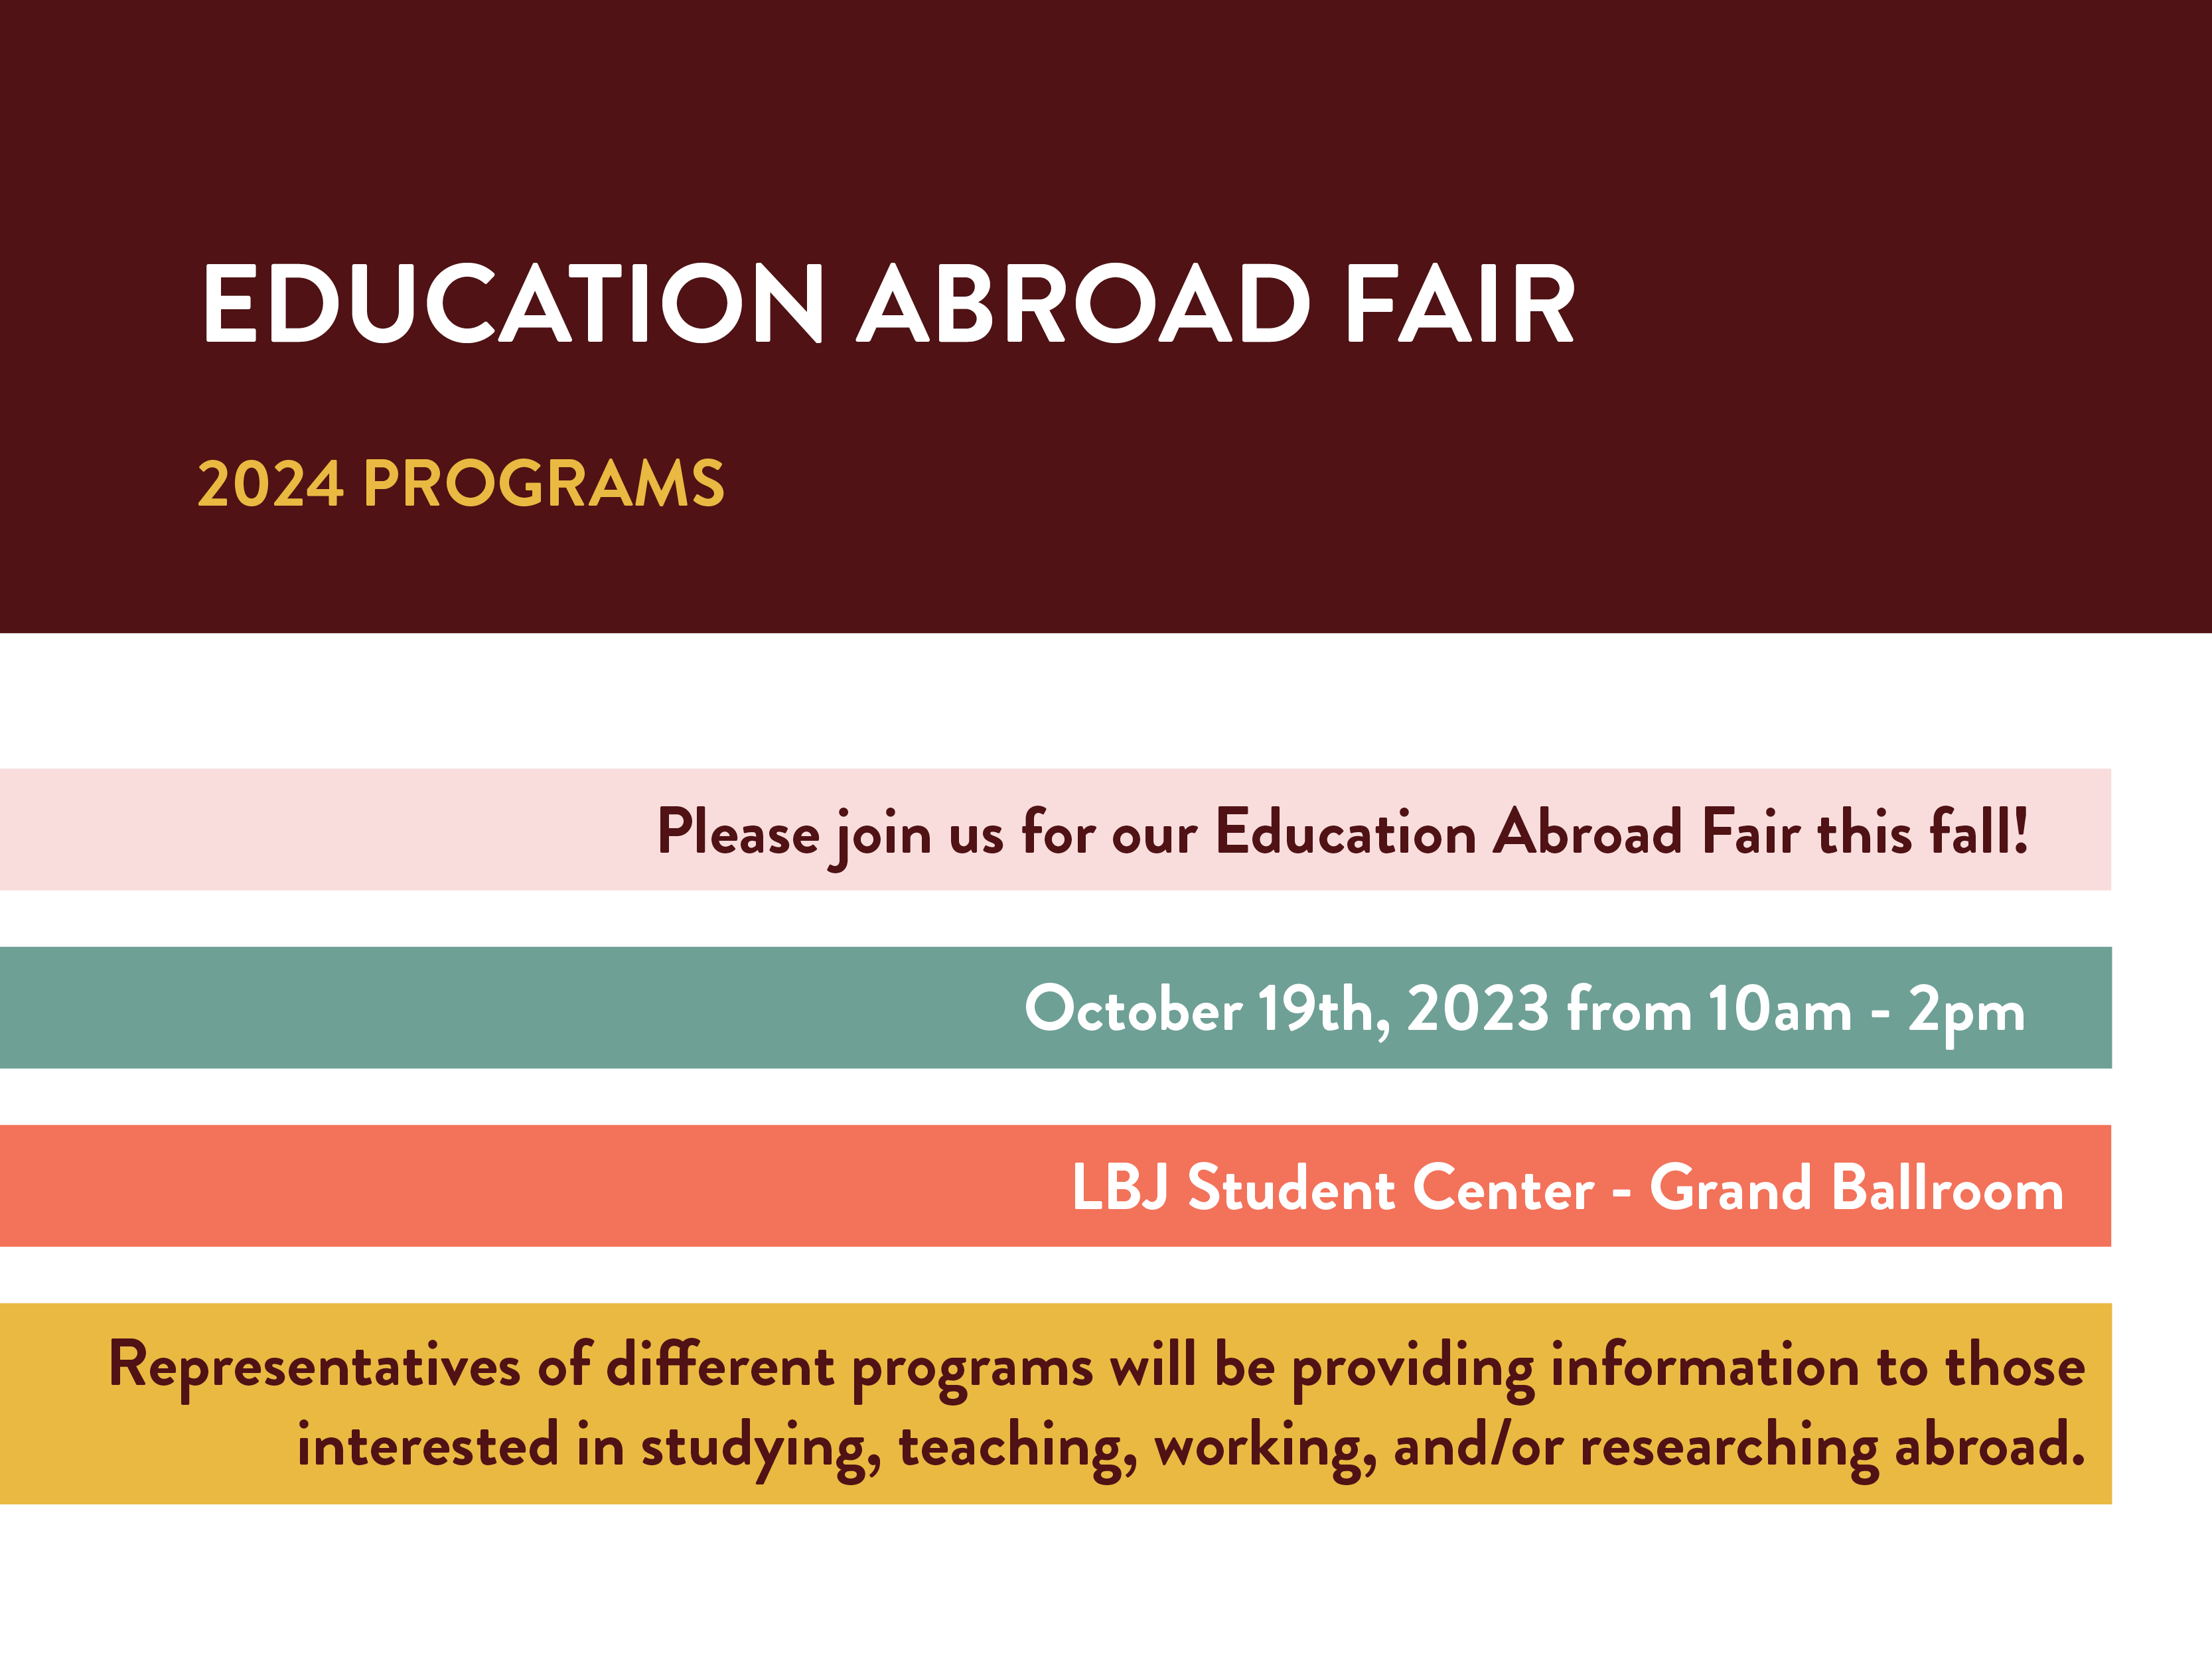 Education Abroad Fair Infographic